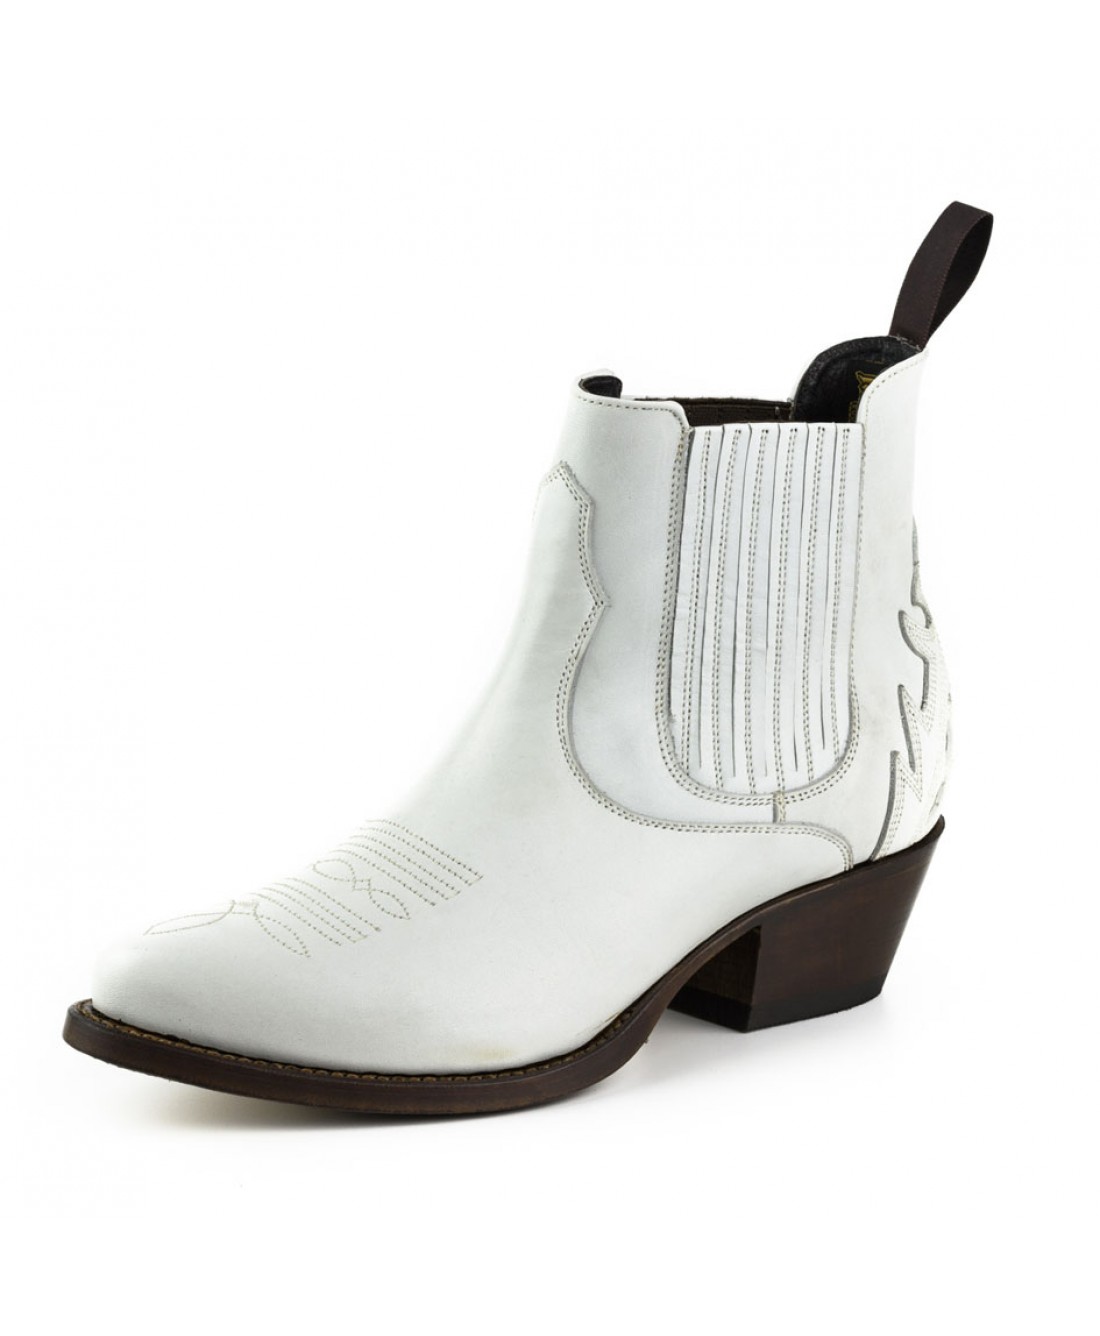 Mayura 2487 Marilyn White Ladies Cowboy Ankle Boots